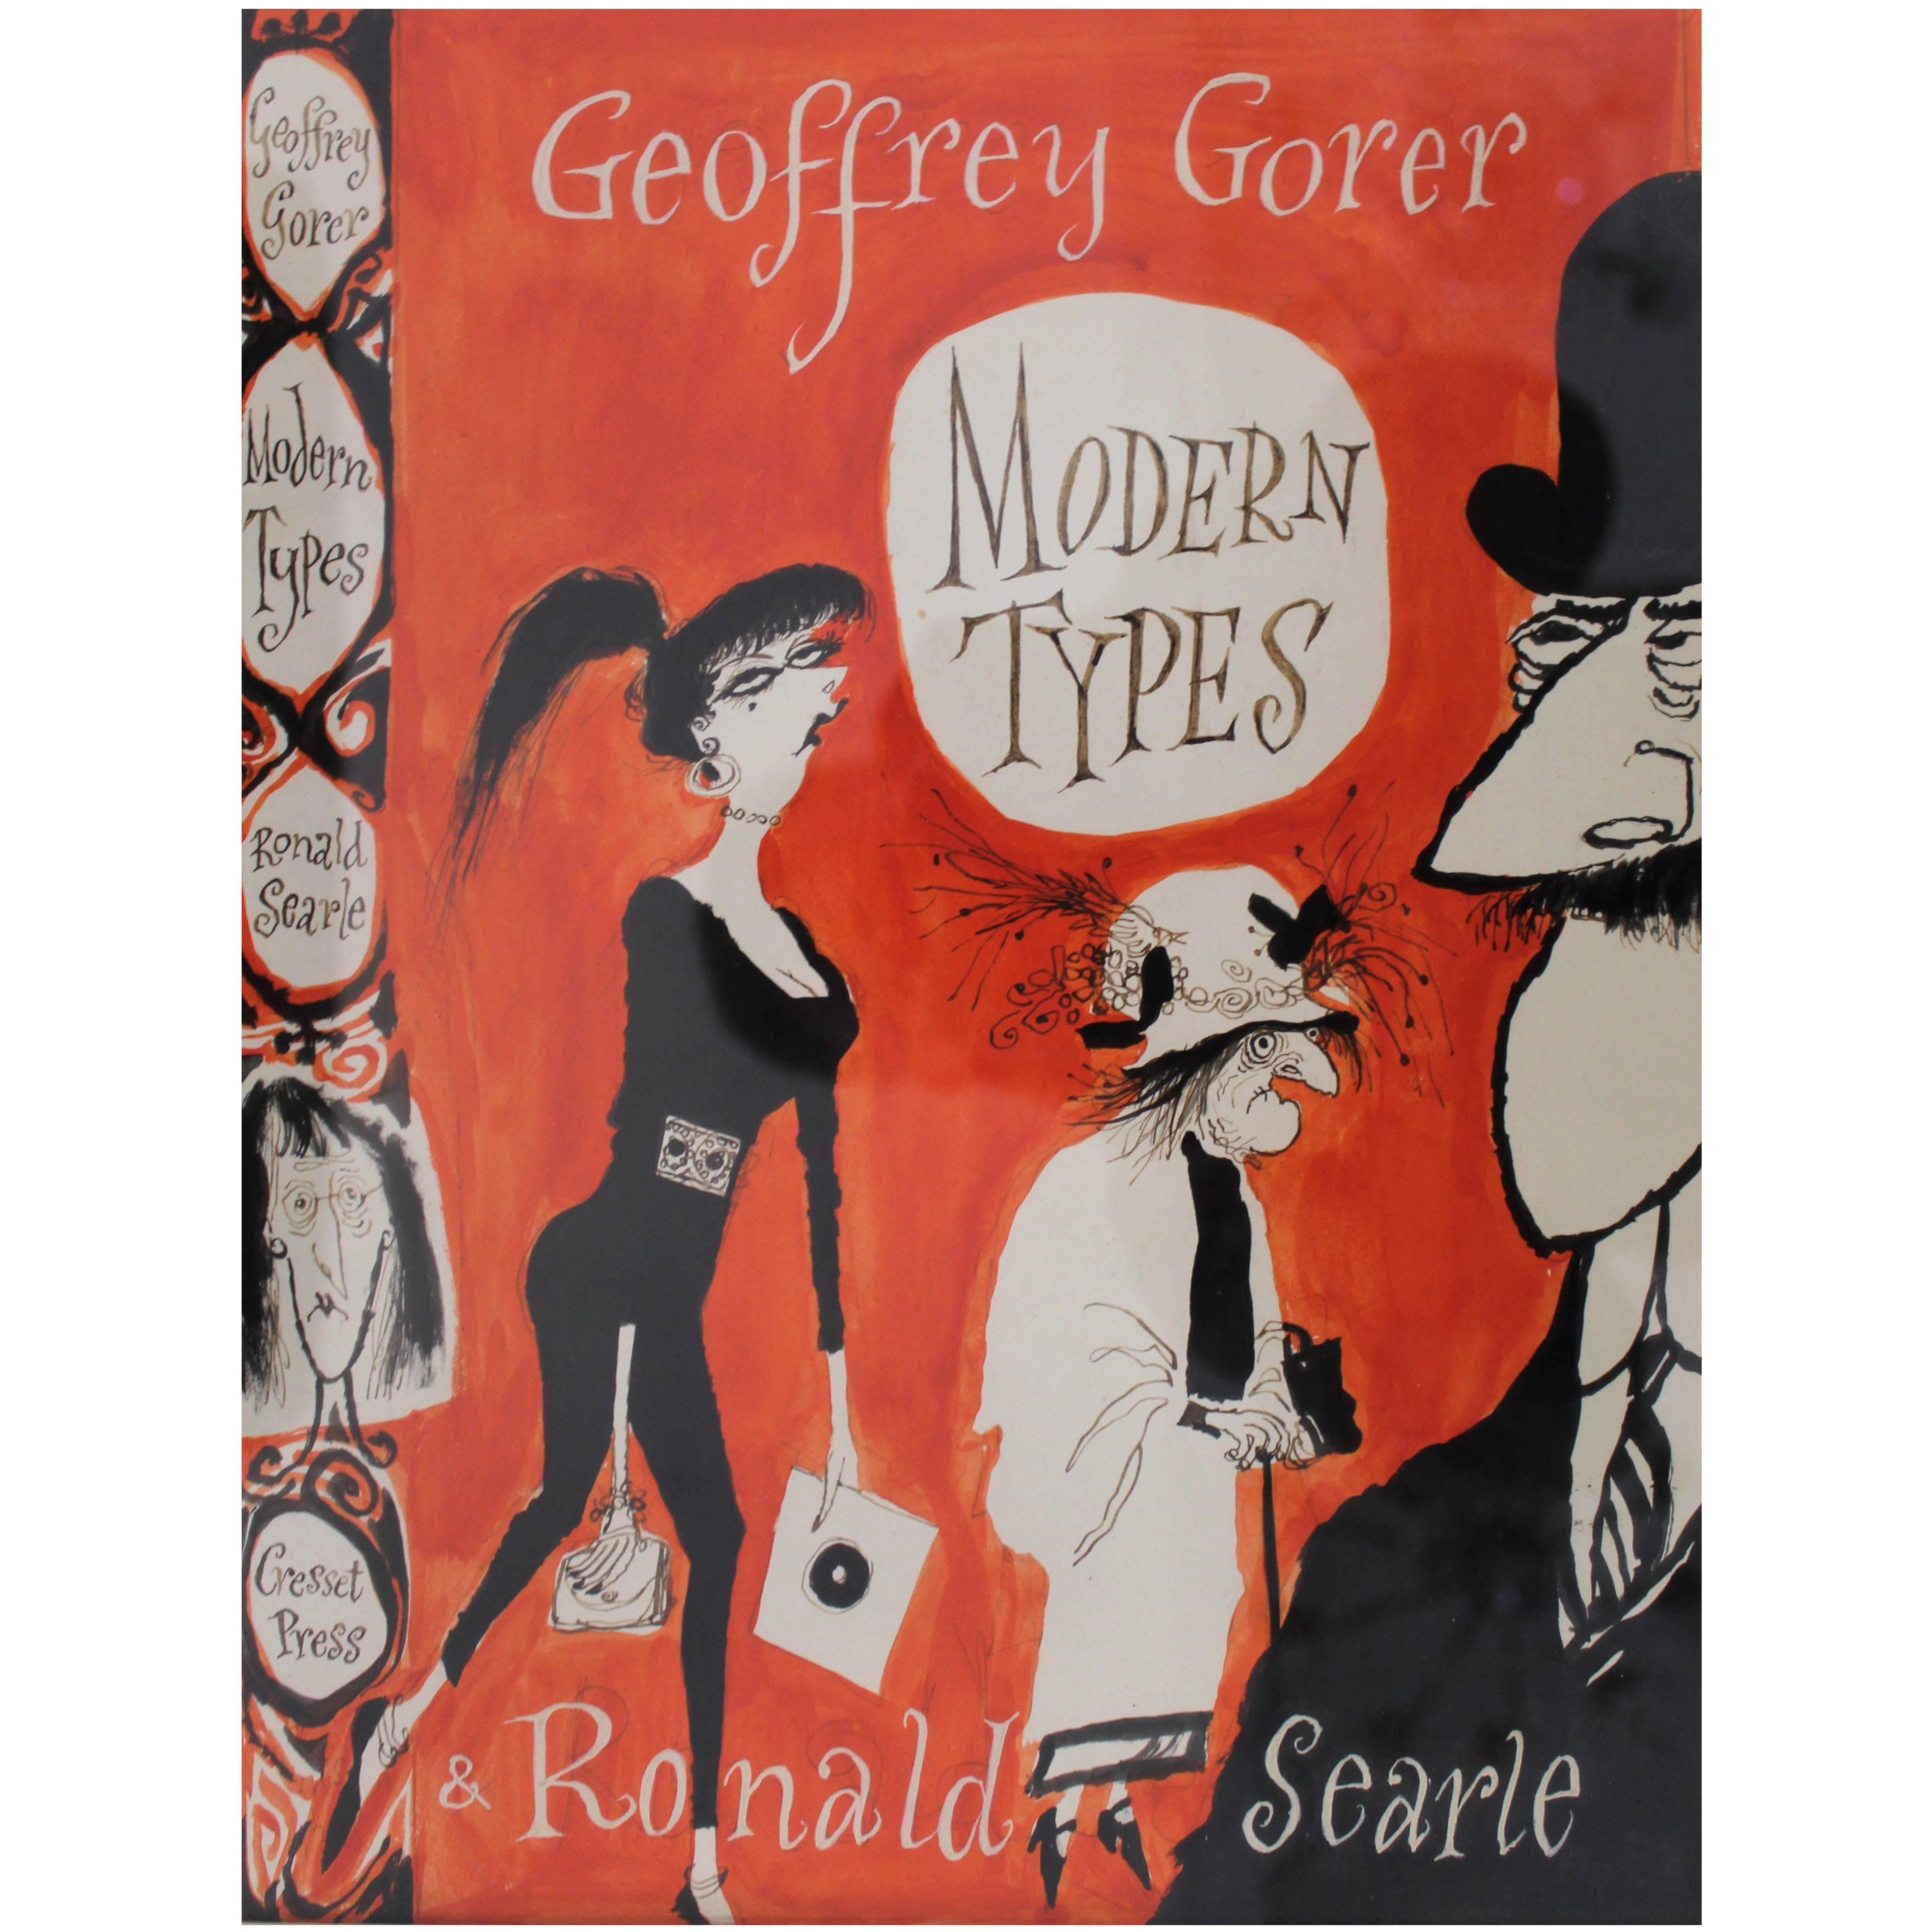 Ronald Searle Painting for 'Modern Types' Book Cover For Sale